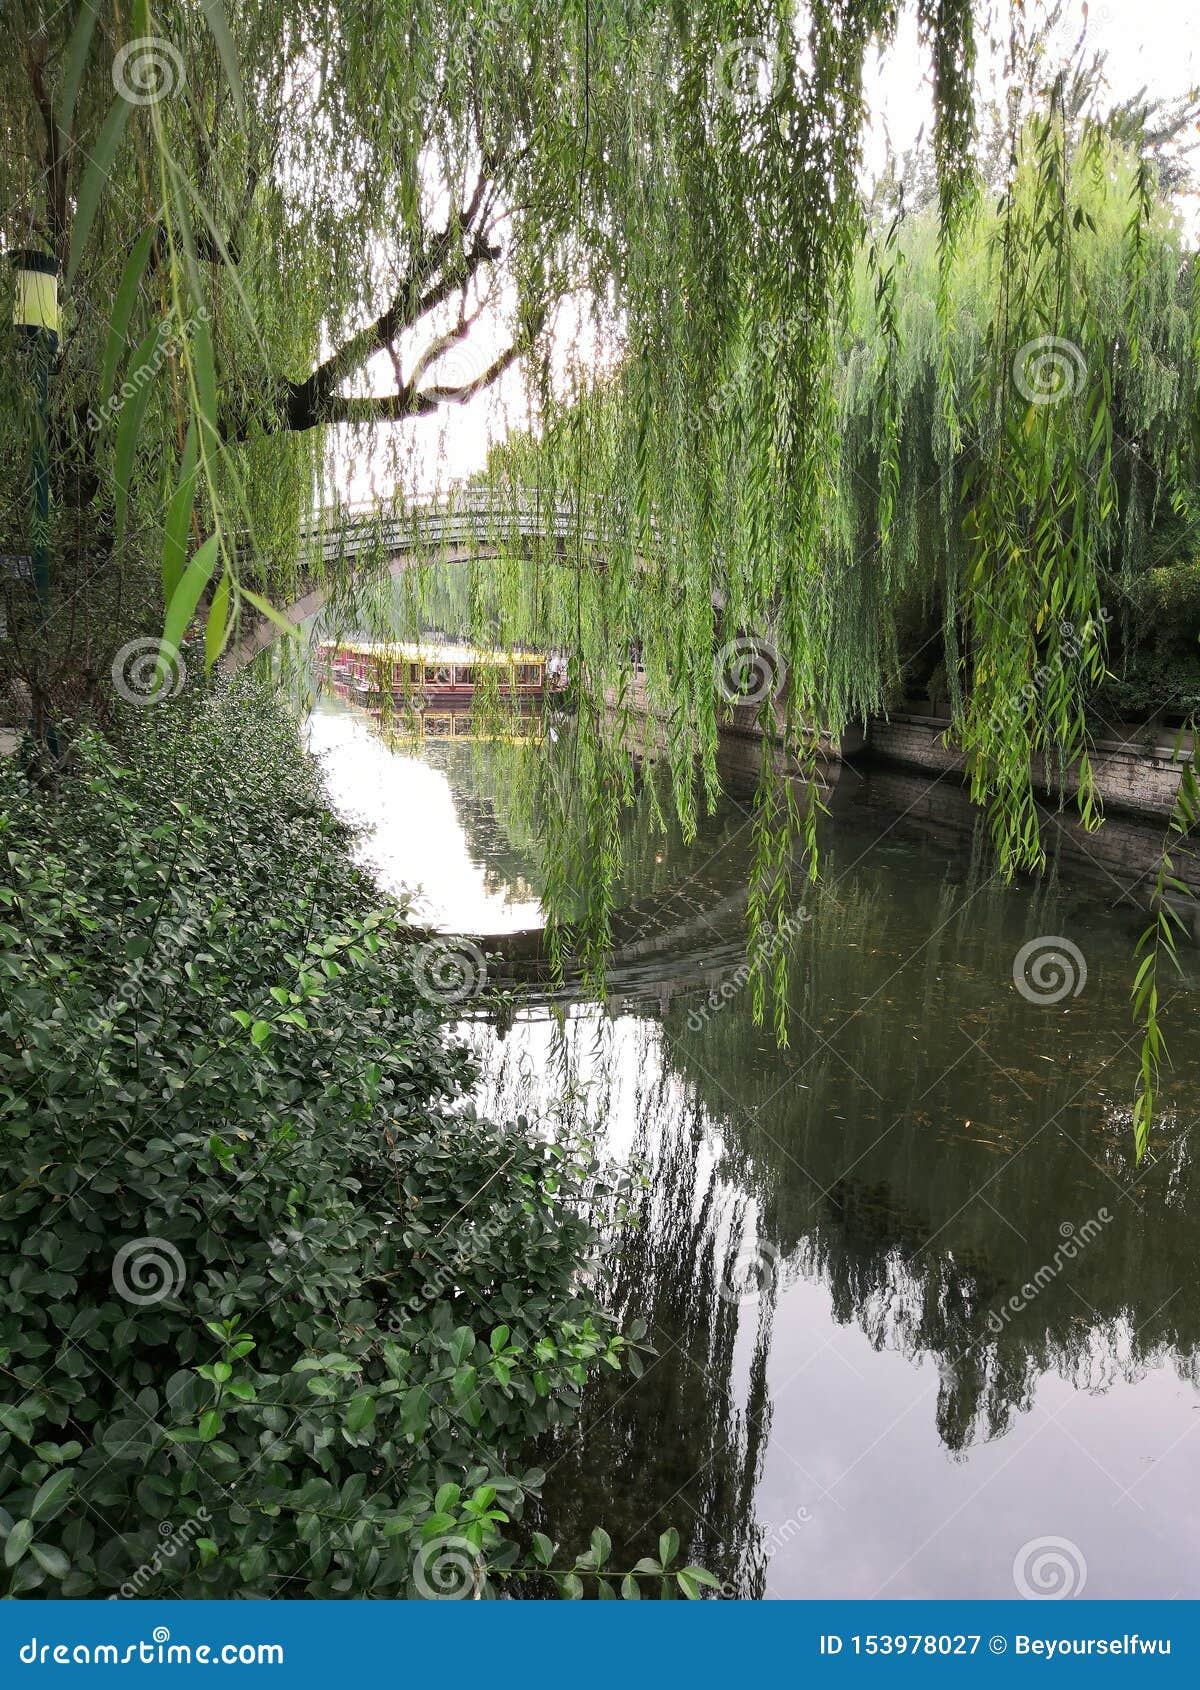 The Moat,spring,Weeping Willows, Arch Bridge Stock Image - Image of ...